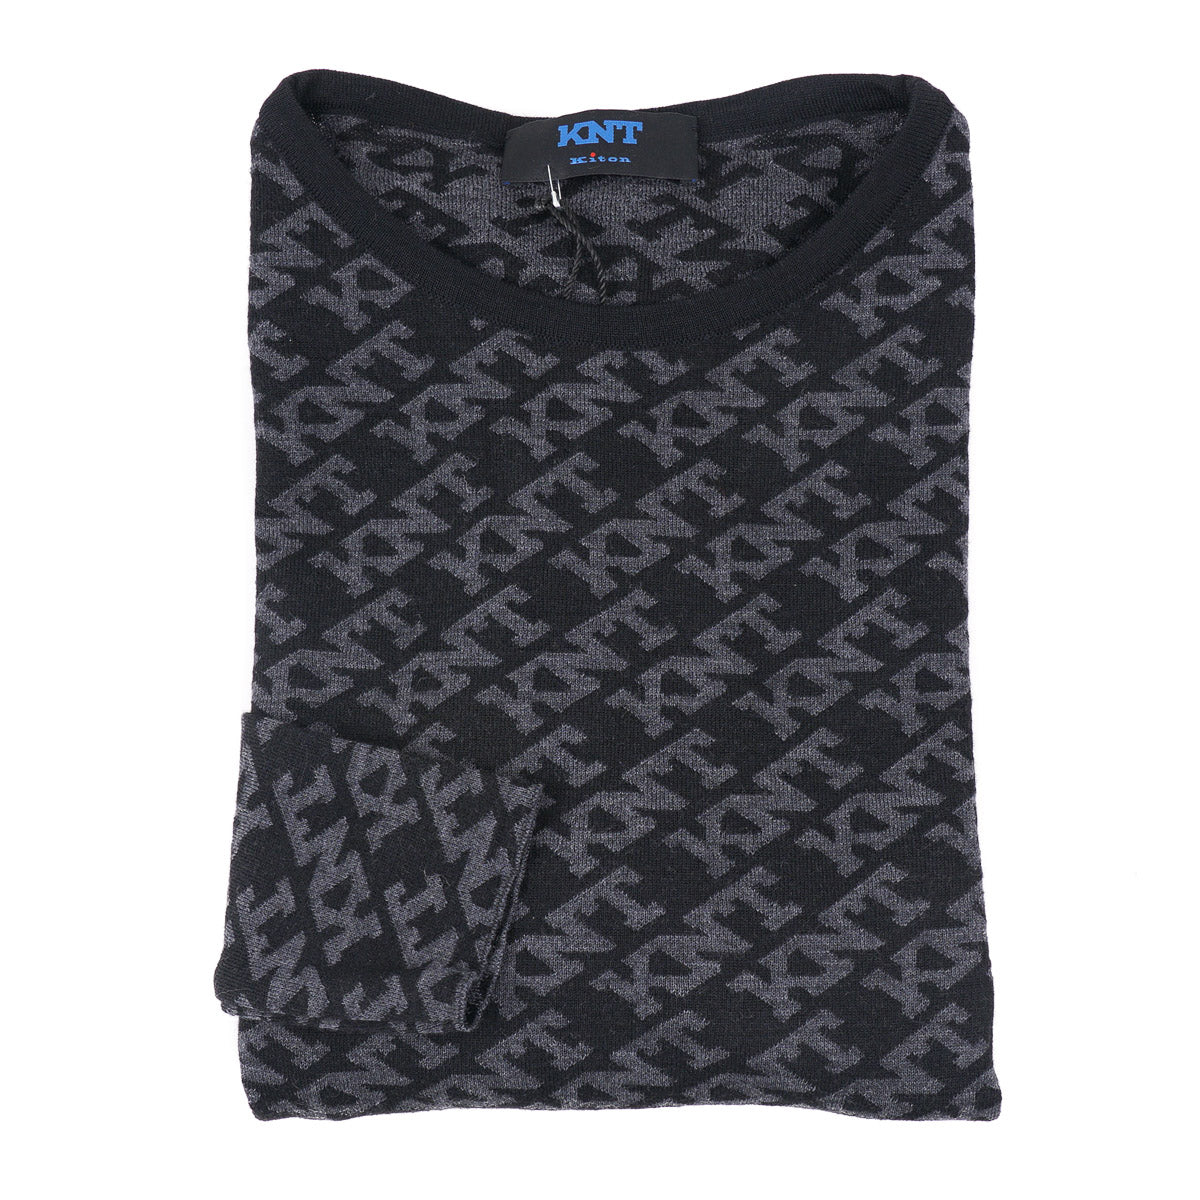 Kiton KNT Cashmere and Wool Sweater - Top Shelf Apparel